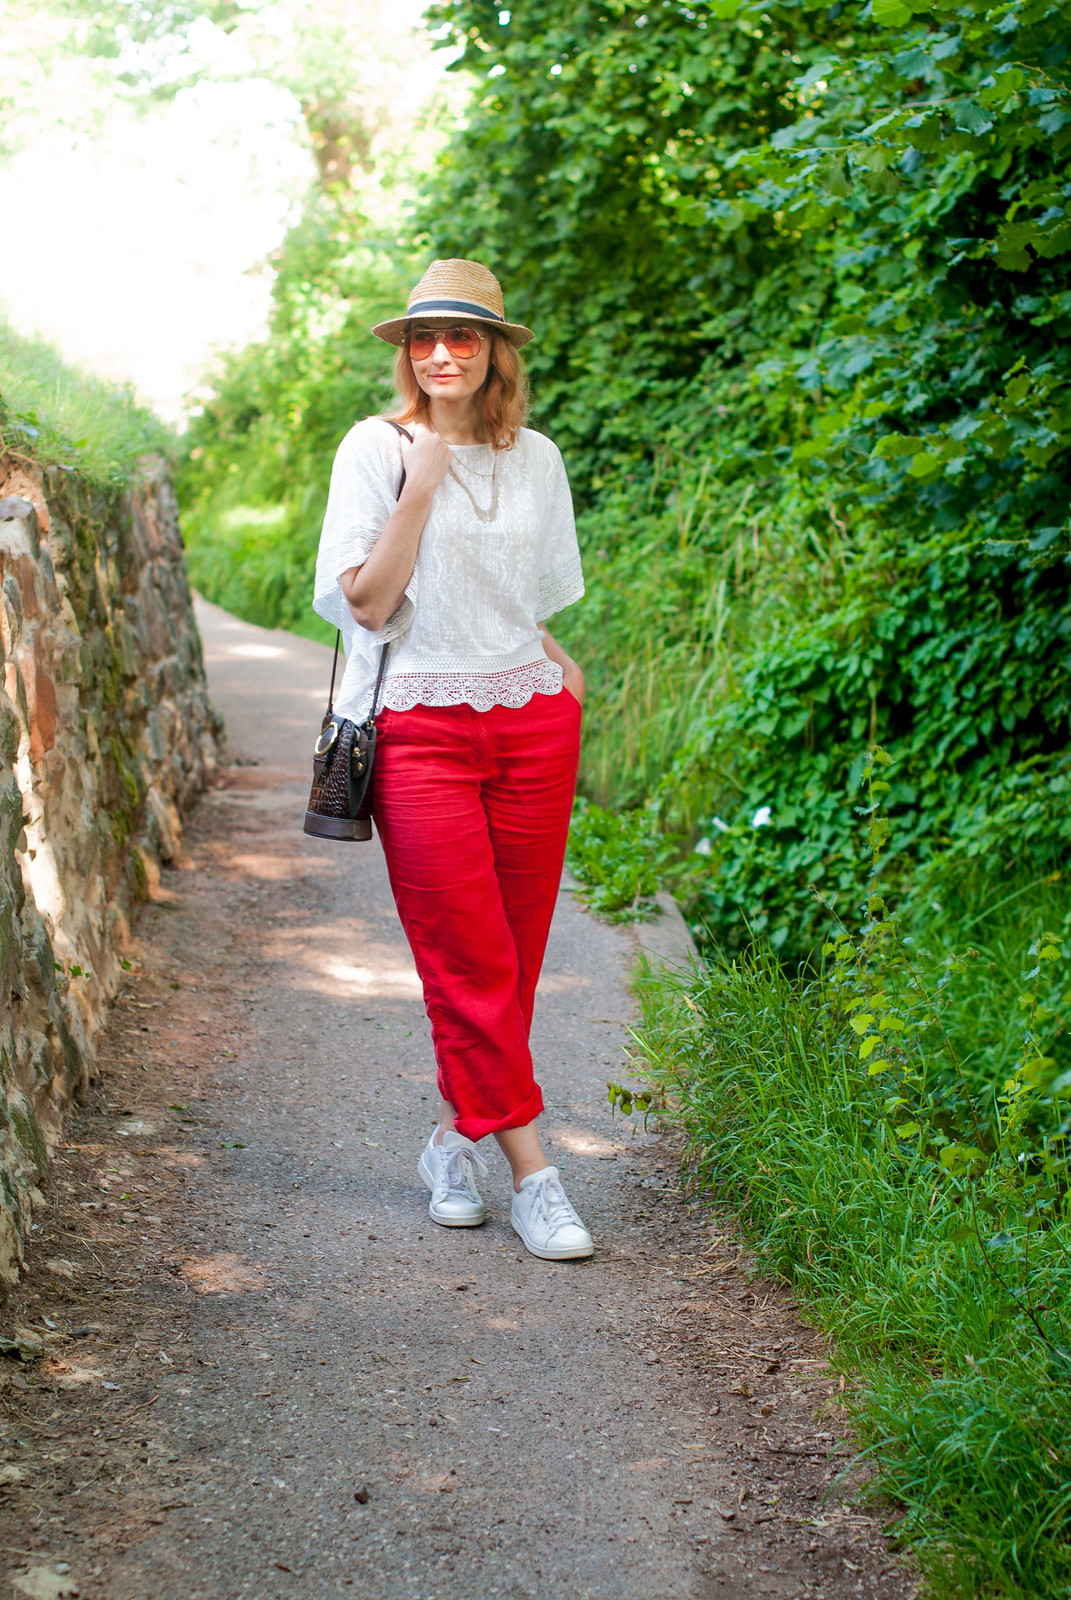 Red and white: A bold summer combination loose white lace top red wide leg linen pants straw hat white Adidas Stan Smiths orange tint aviator sunglasses | Not Dressed As Lamb, over 40 style